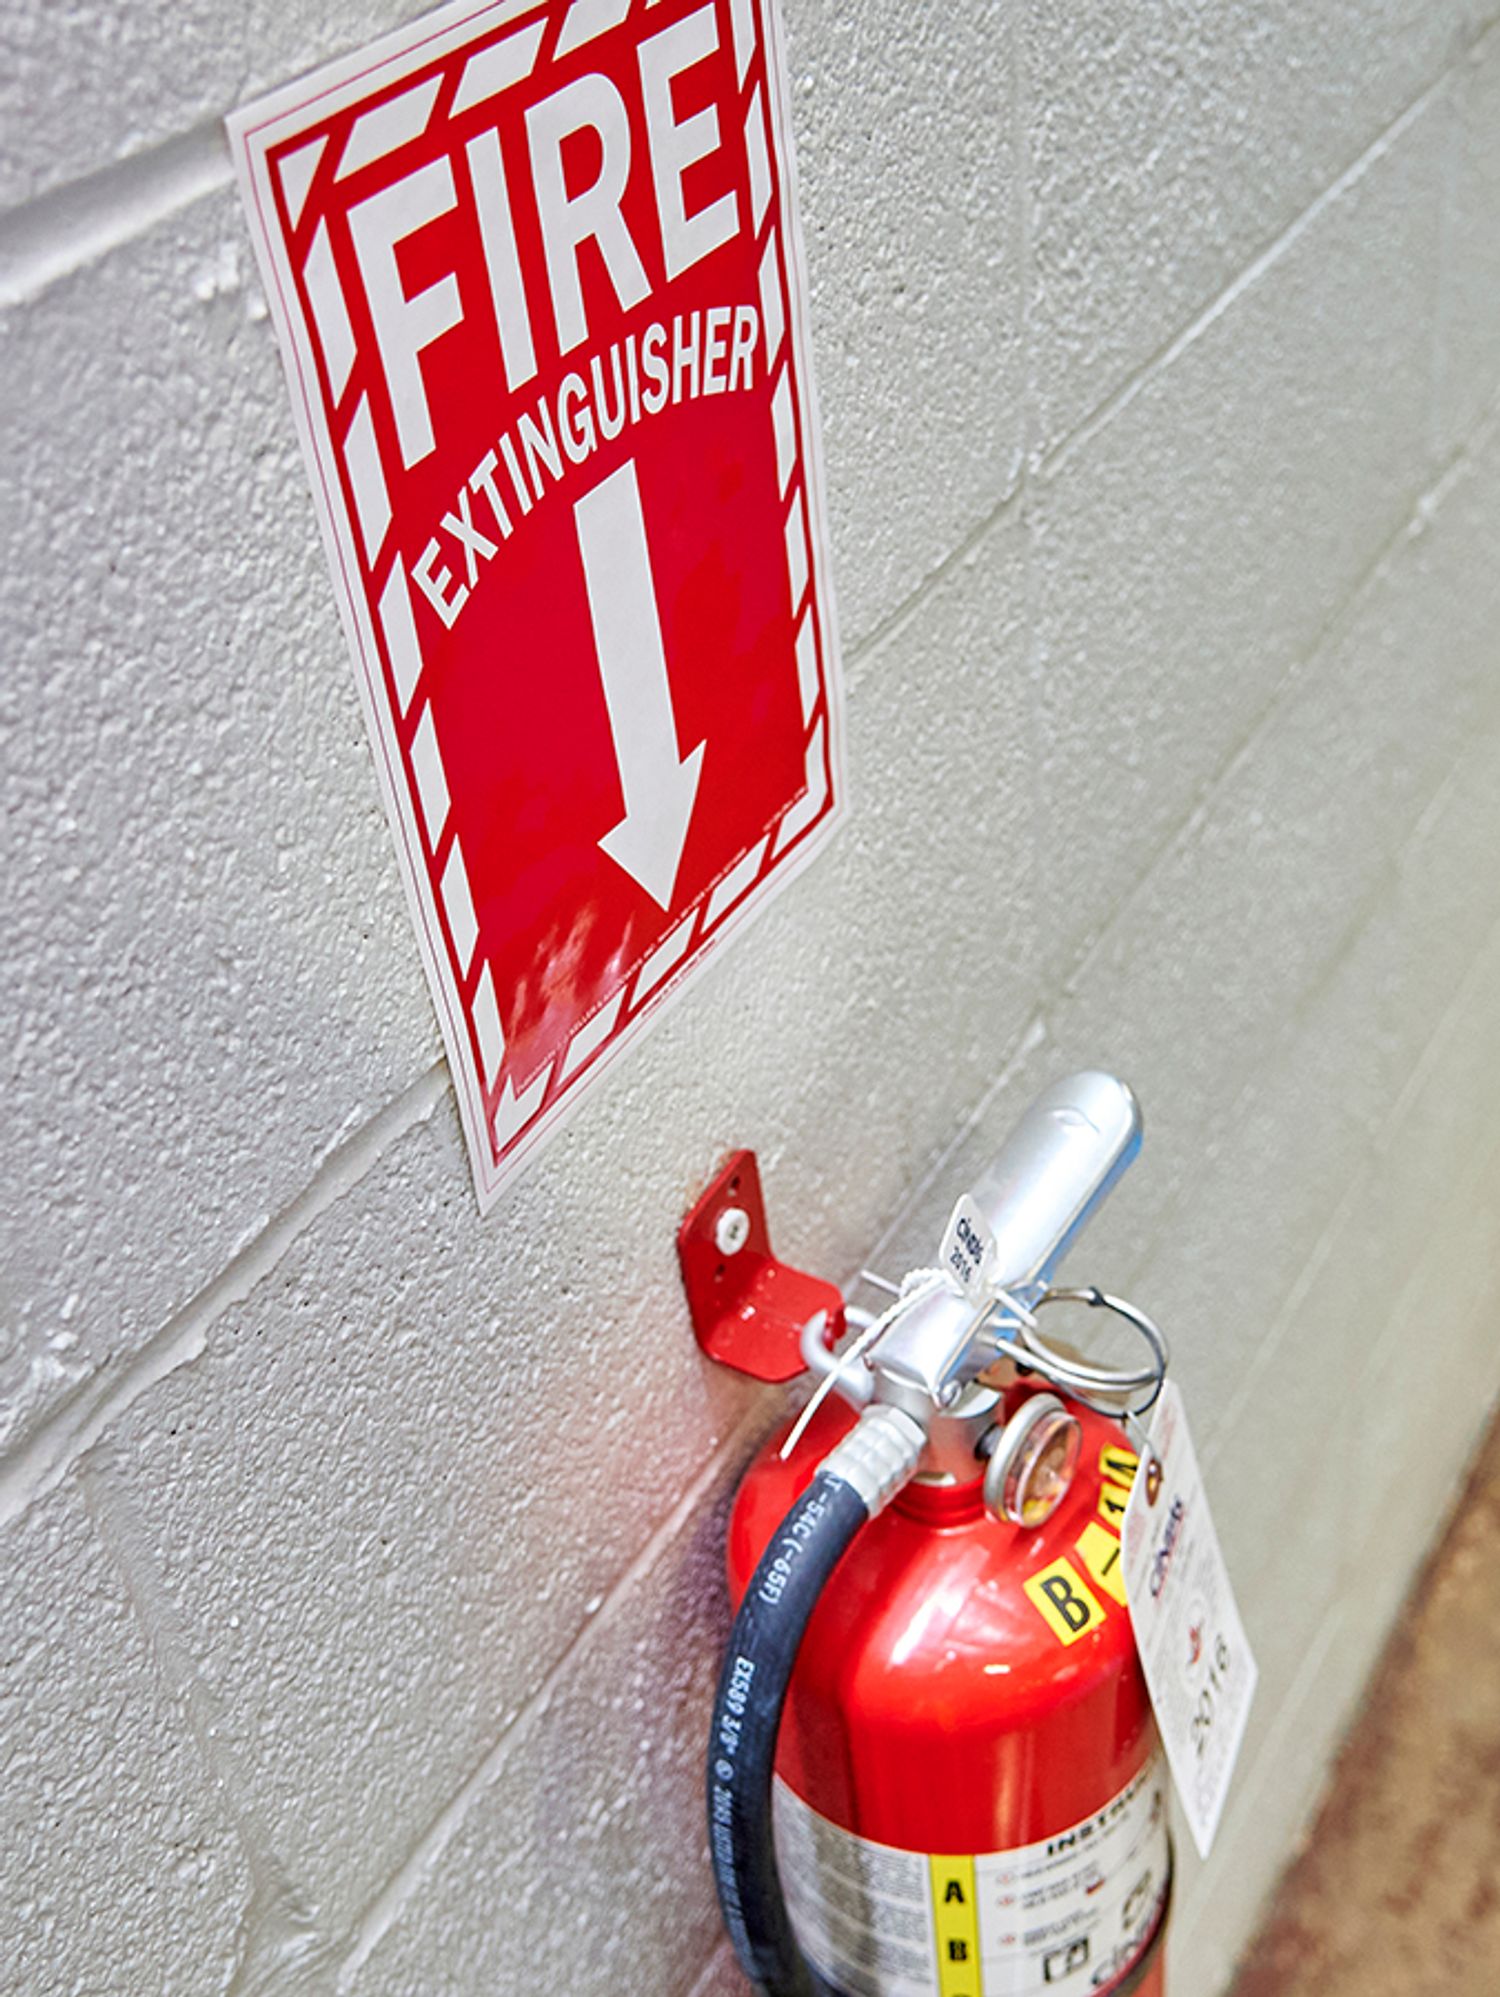 The portable fire extinguisher triad — defining “readibly